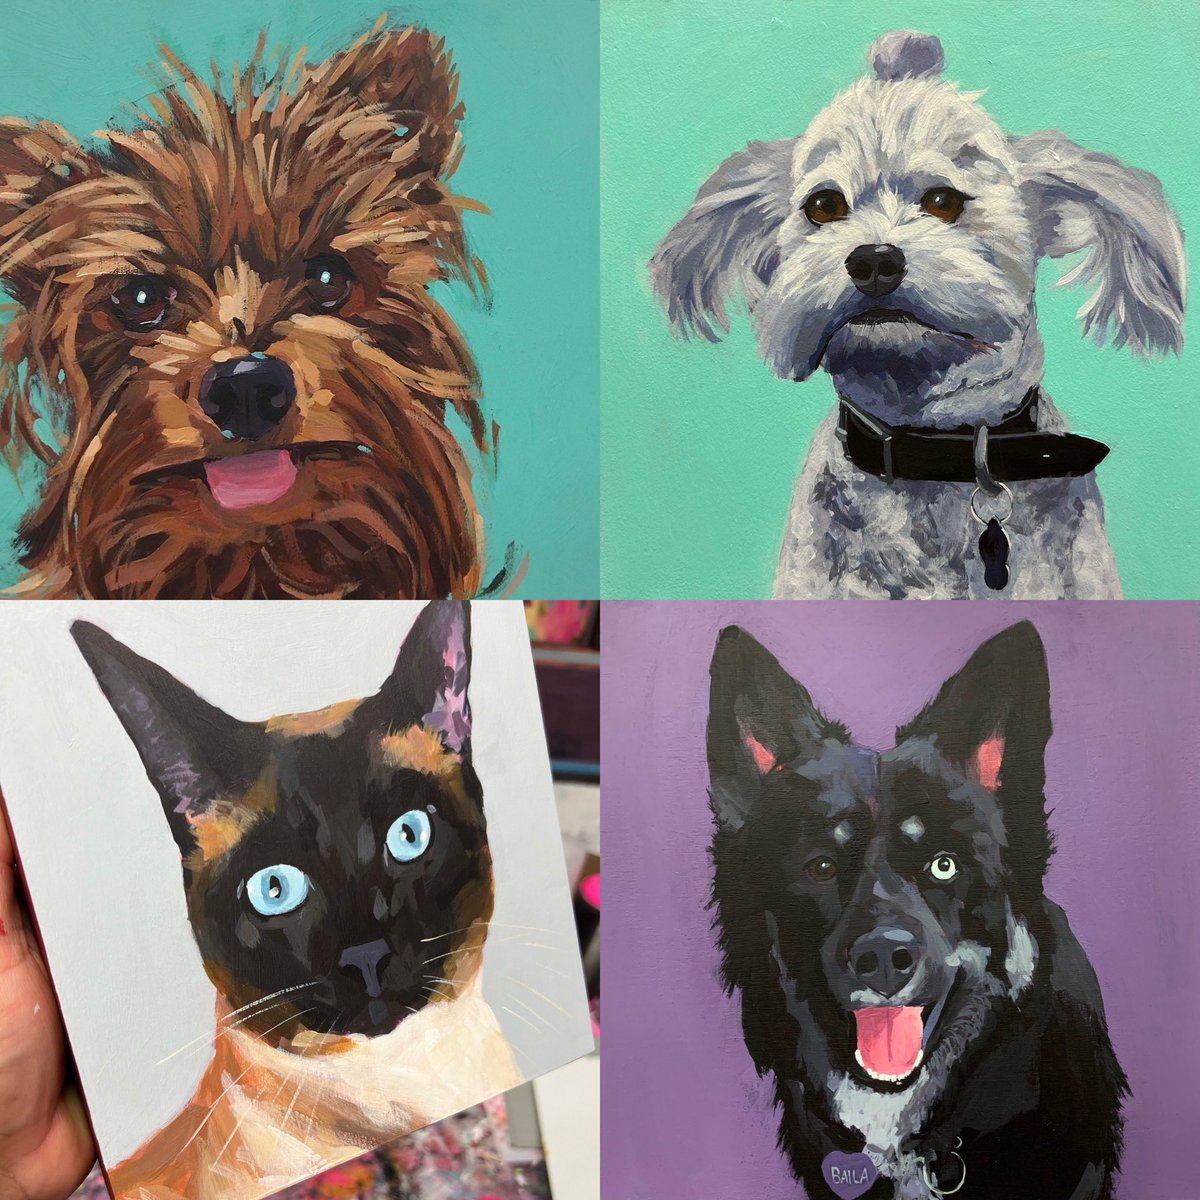 Open for commissions at the moment. #dogportraits #dogpainting #cat